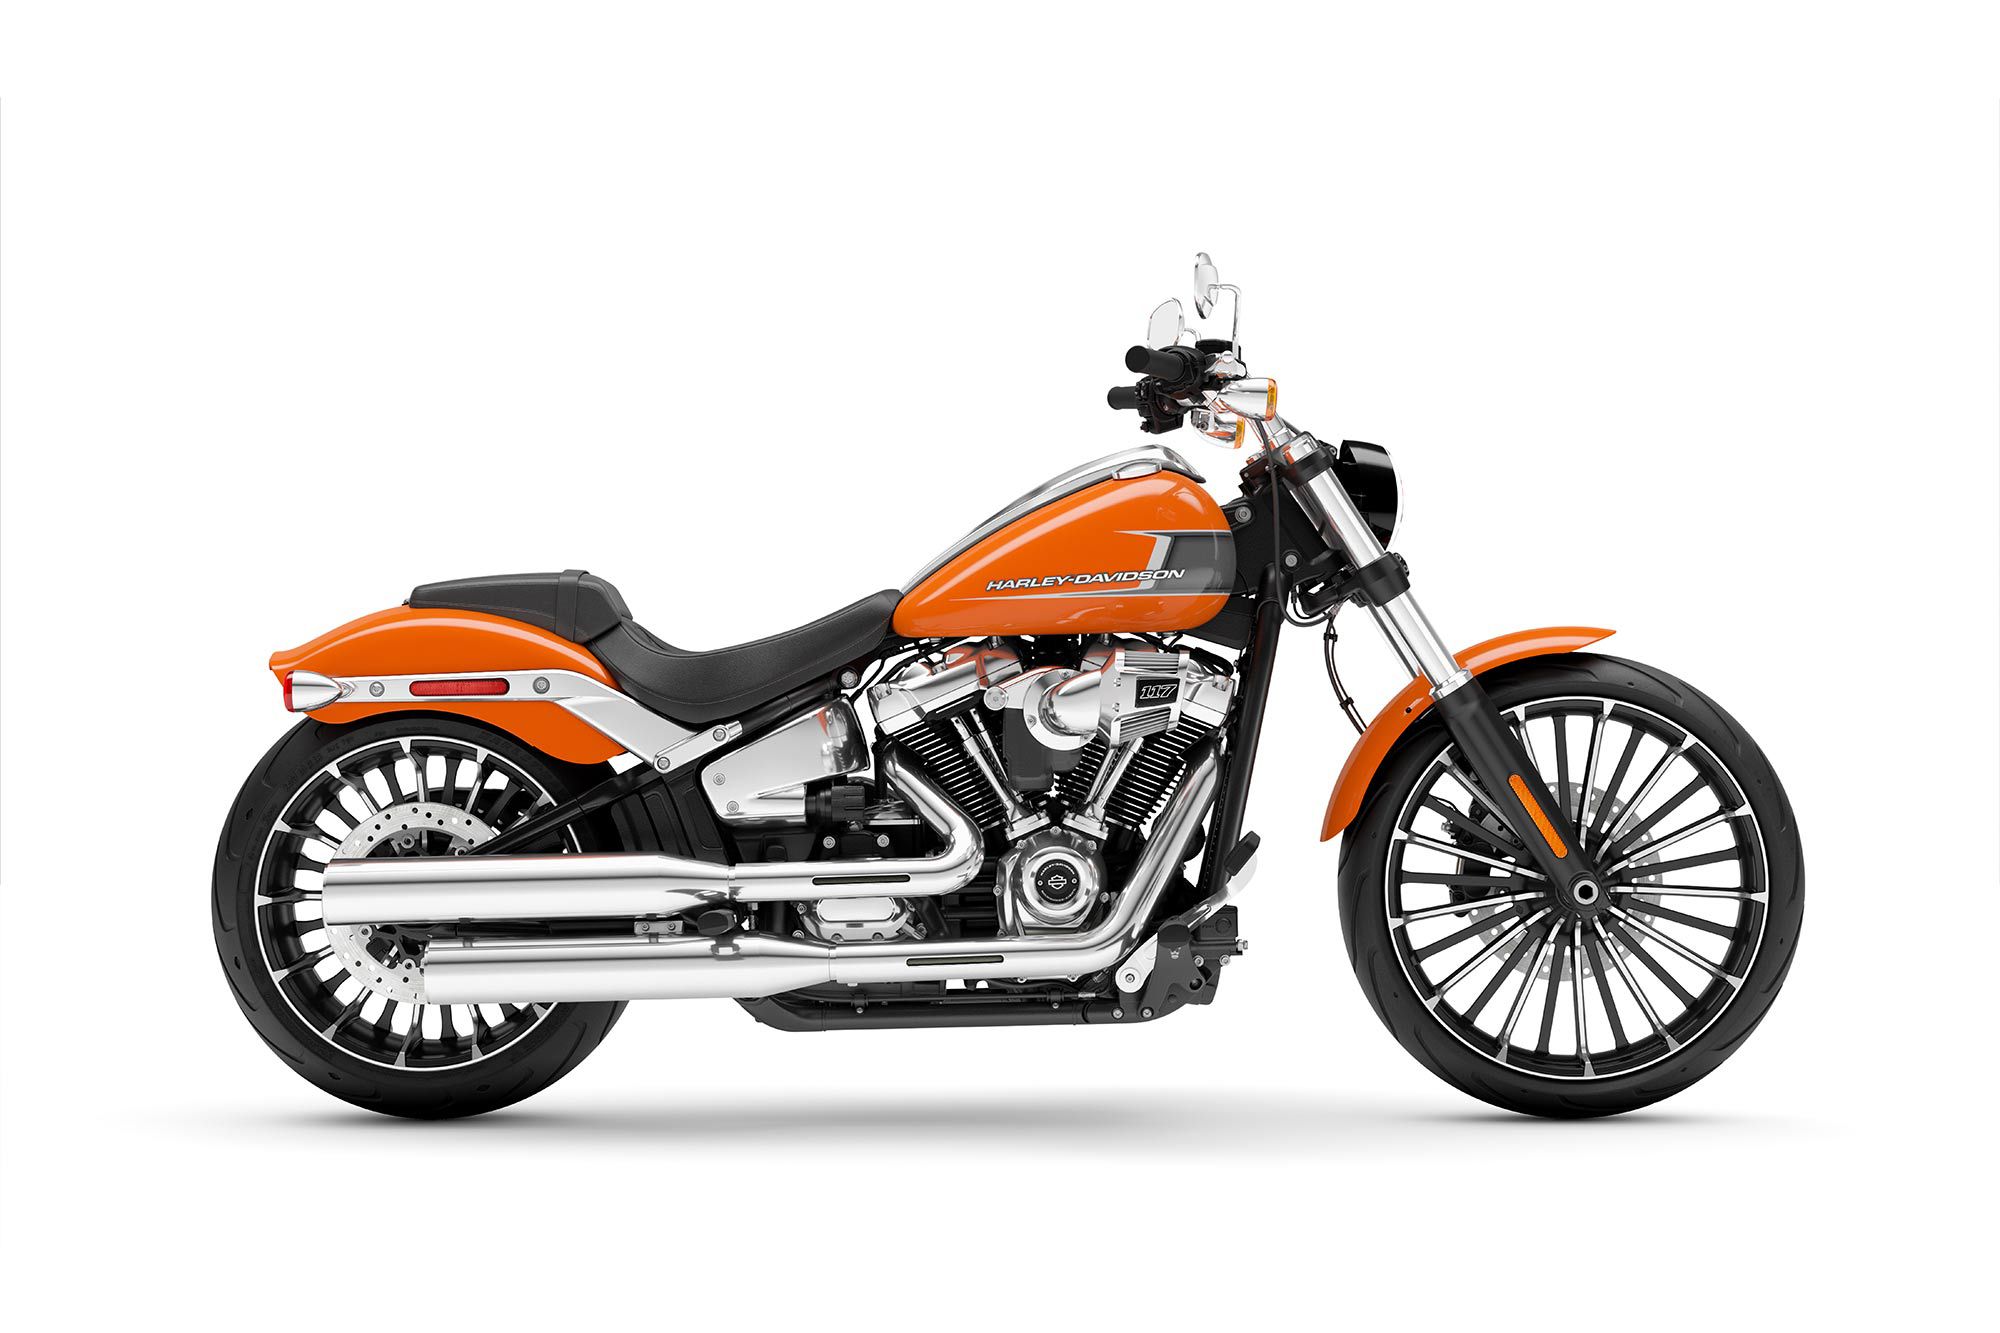 The official portrait: The 2023 Harley-Davidson Softail Breakout, in “Harley Orange”.